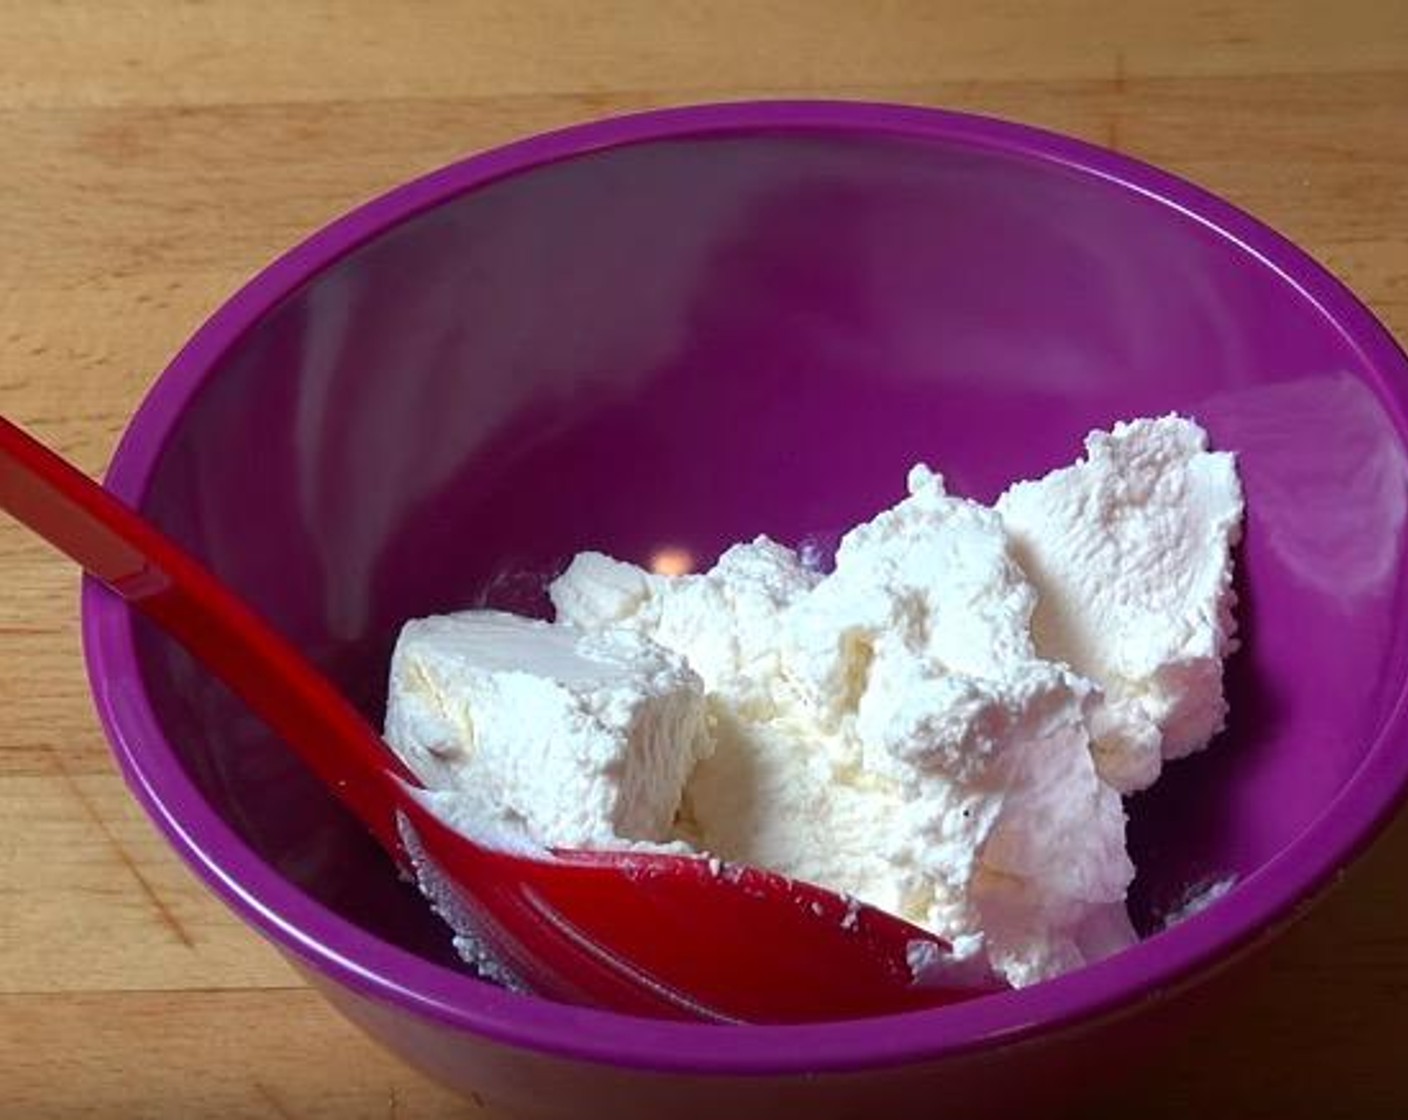 step 3 In a small mixing bowl, add Ricotta Cheese (3/4 cup) and Powdered Confectioners Sugar (2 Tbsp). Mix together to combine.